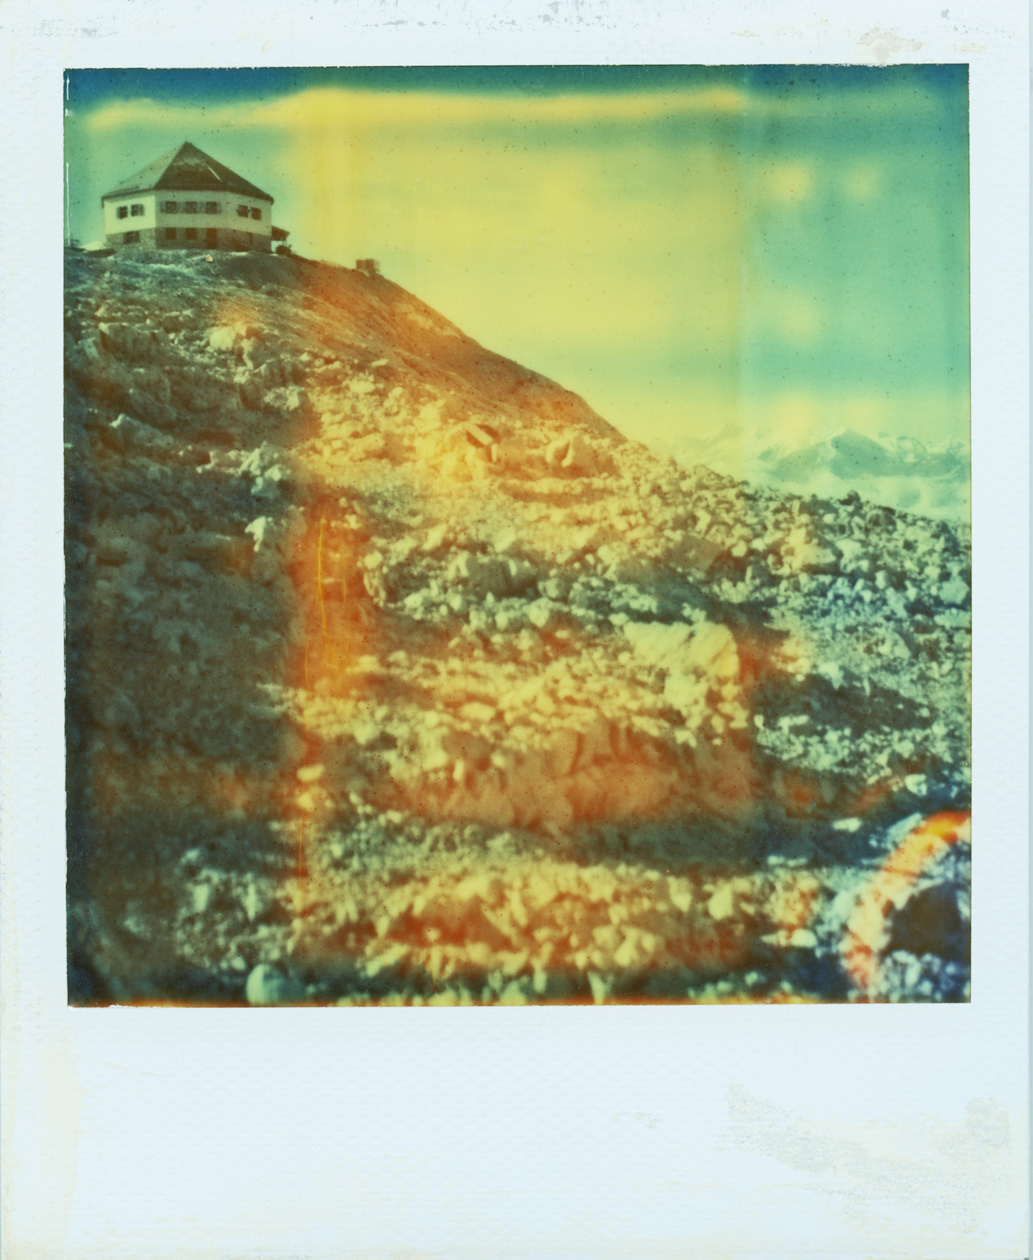 bastiank POLAROID instant time-zero SX-70 land camera hochkönig hiking Nature above the clouds SKY small human being Feeling Free